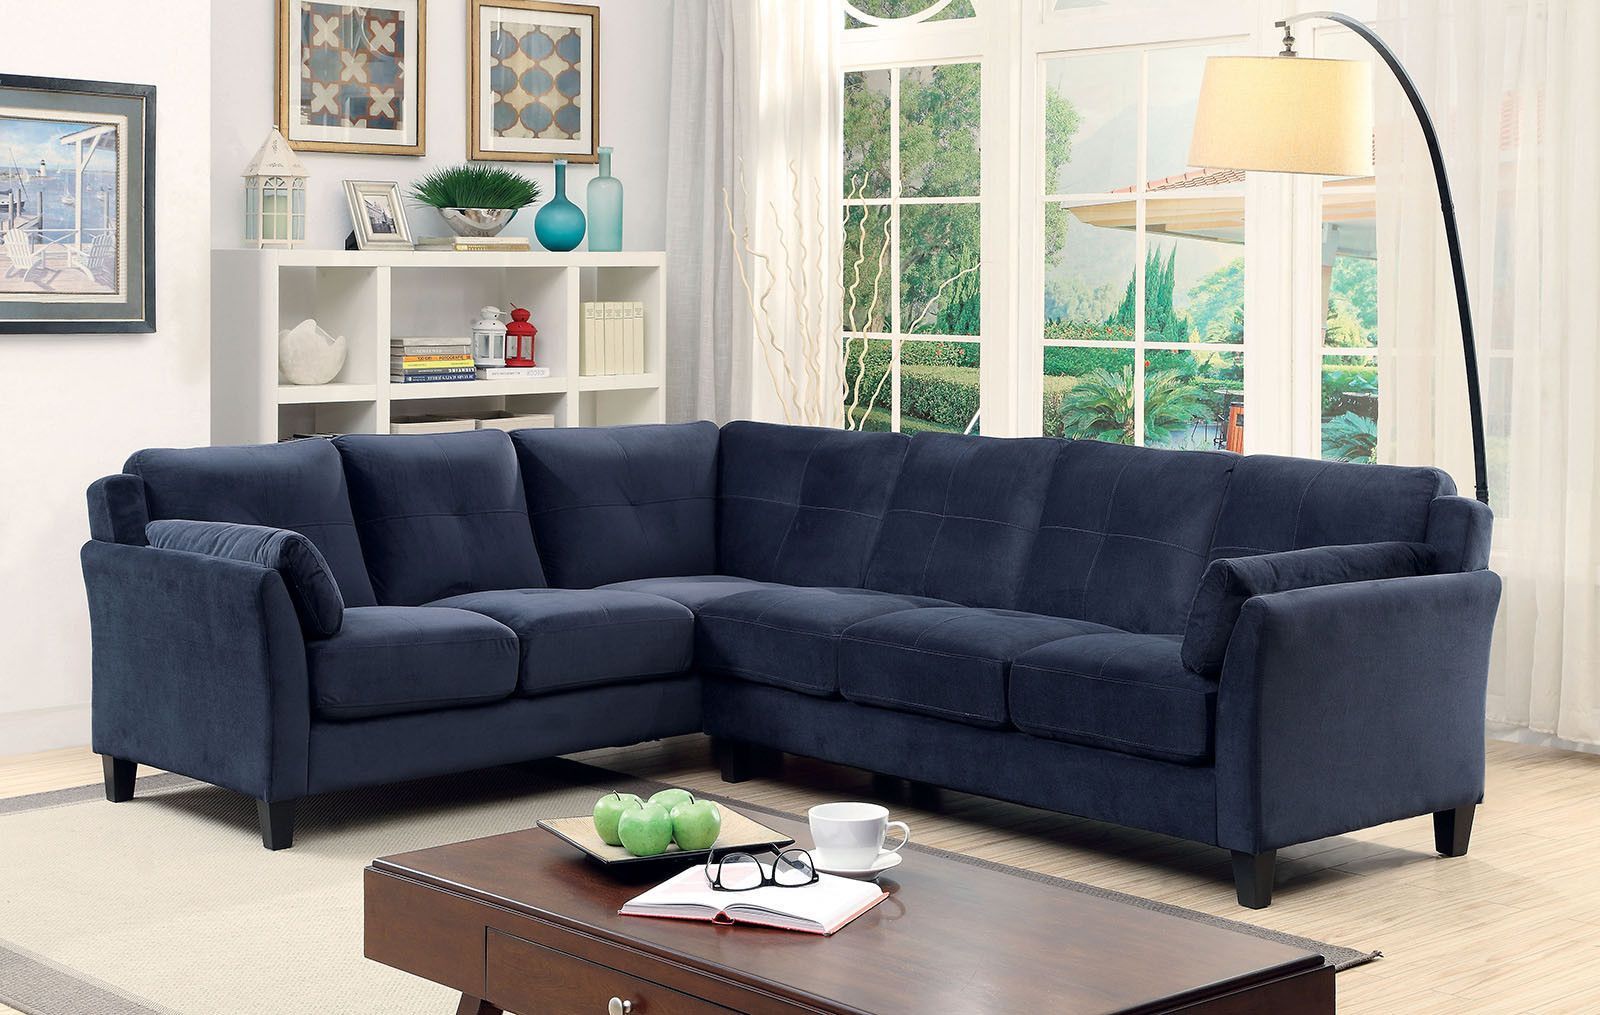 Peever Ii Navy Sectional Sofa – Cm6368nv | Living Room Sectional With Regard To Navy Linen Coil Sofas (View 13 of 20)